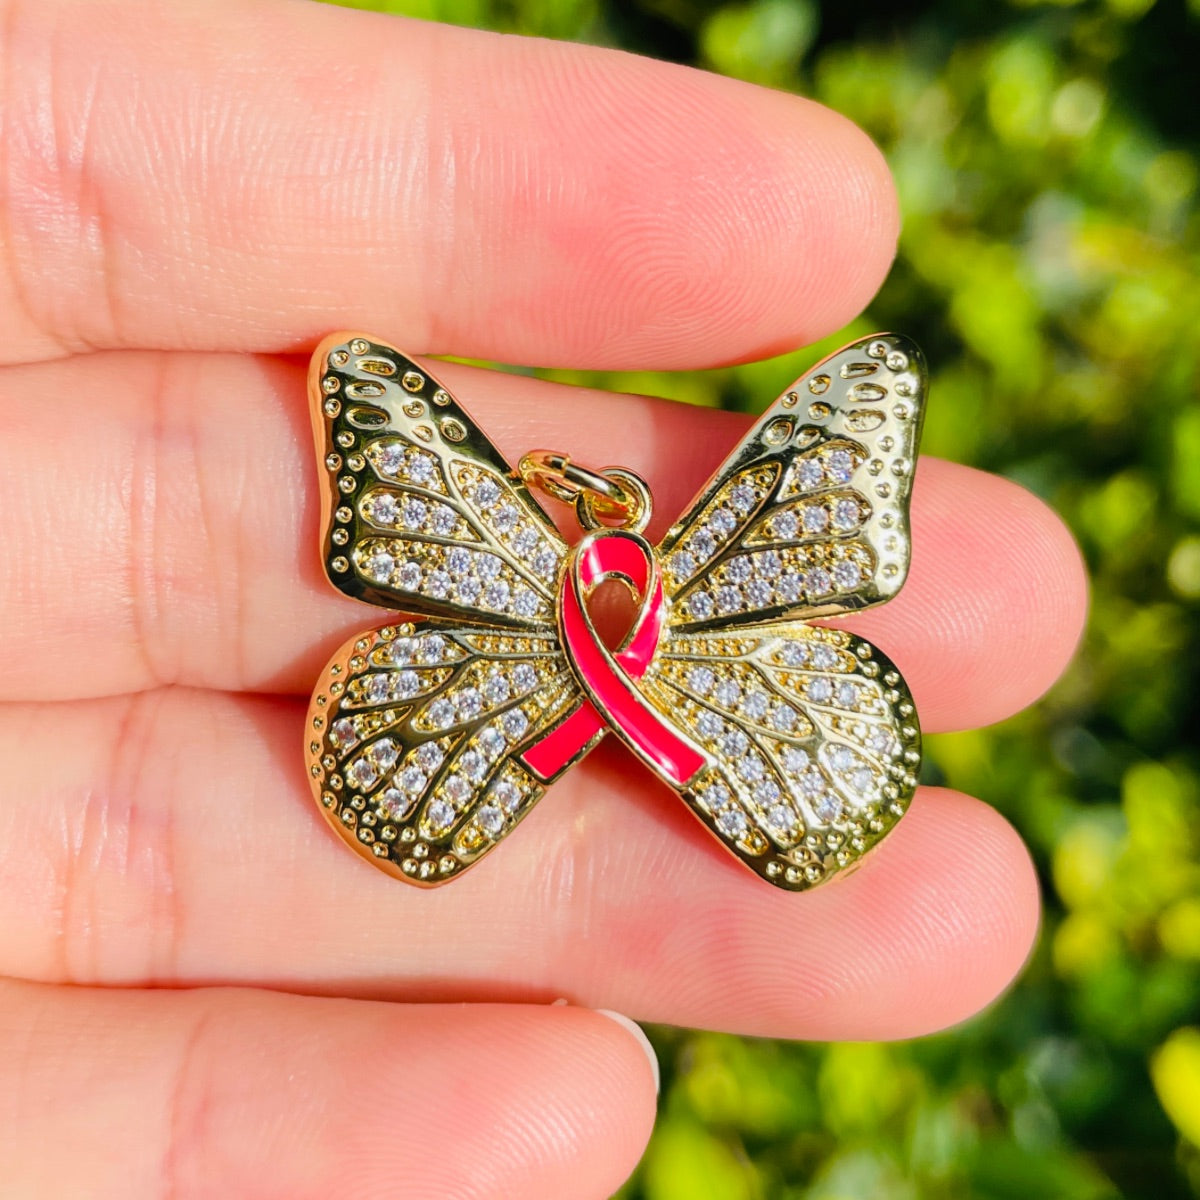 10pcs/lot CZ Pave Pink Ribbon Butterfly Charms - Breast Cancer Awareness Gold CZ Paved Charms Breast Cancer Awareness Butterflies New Charms Arrivals Charms Beads Beyond